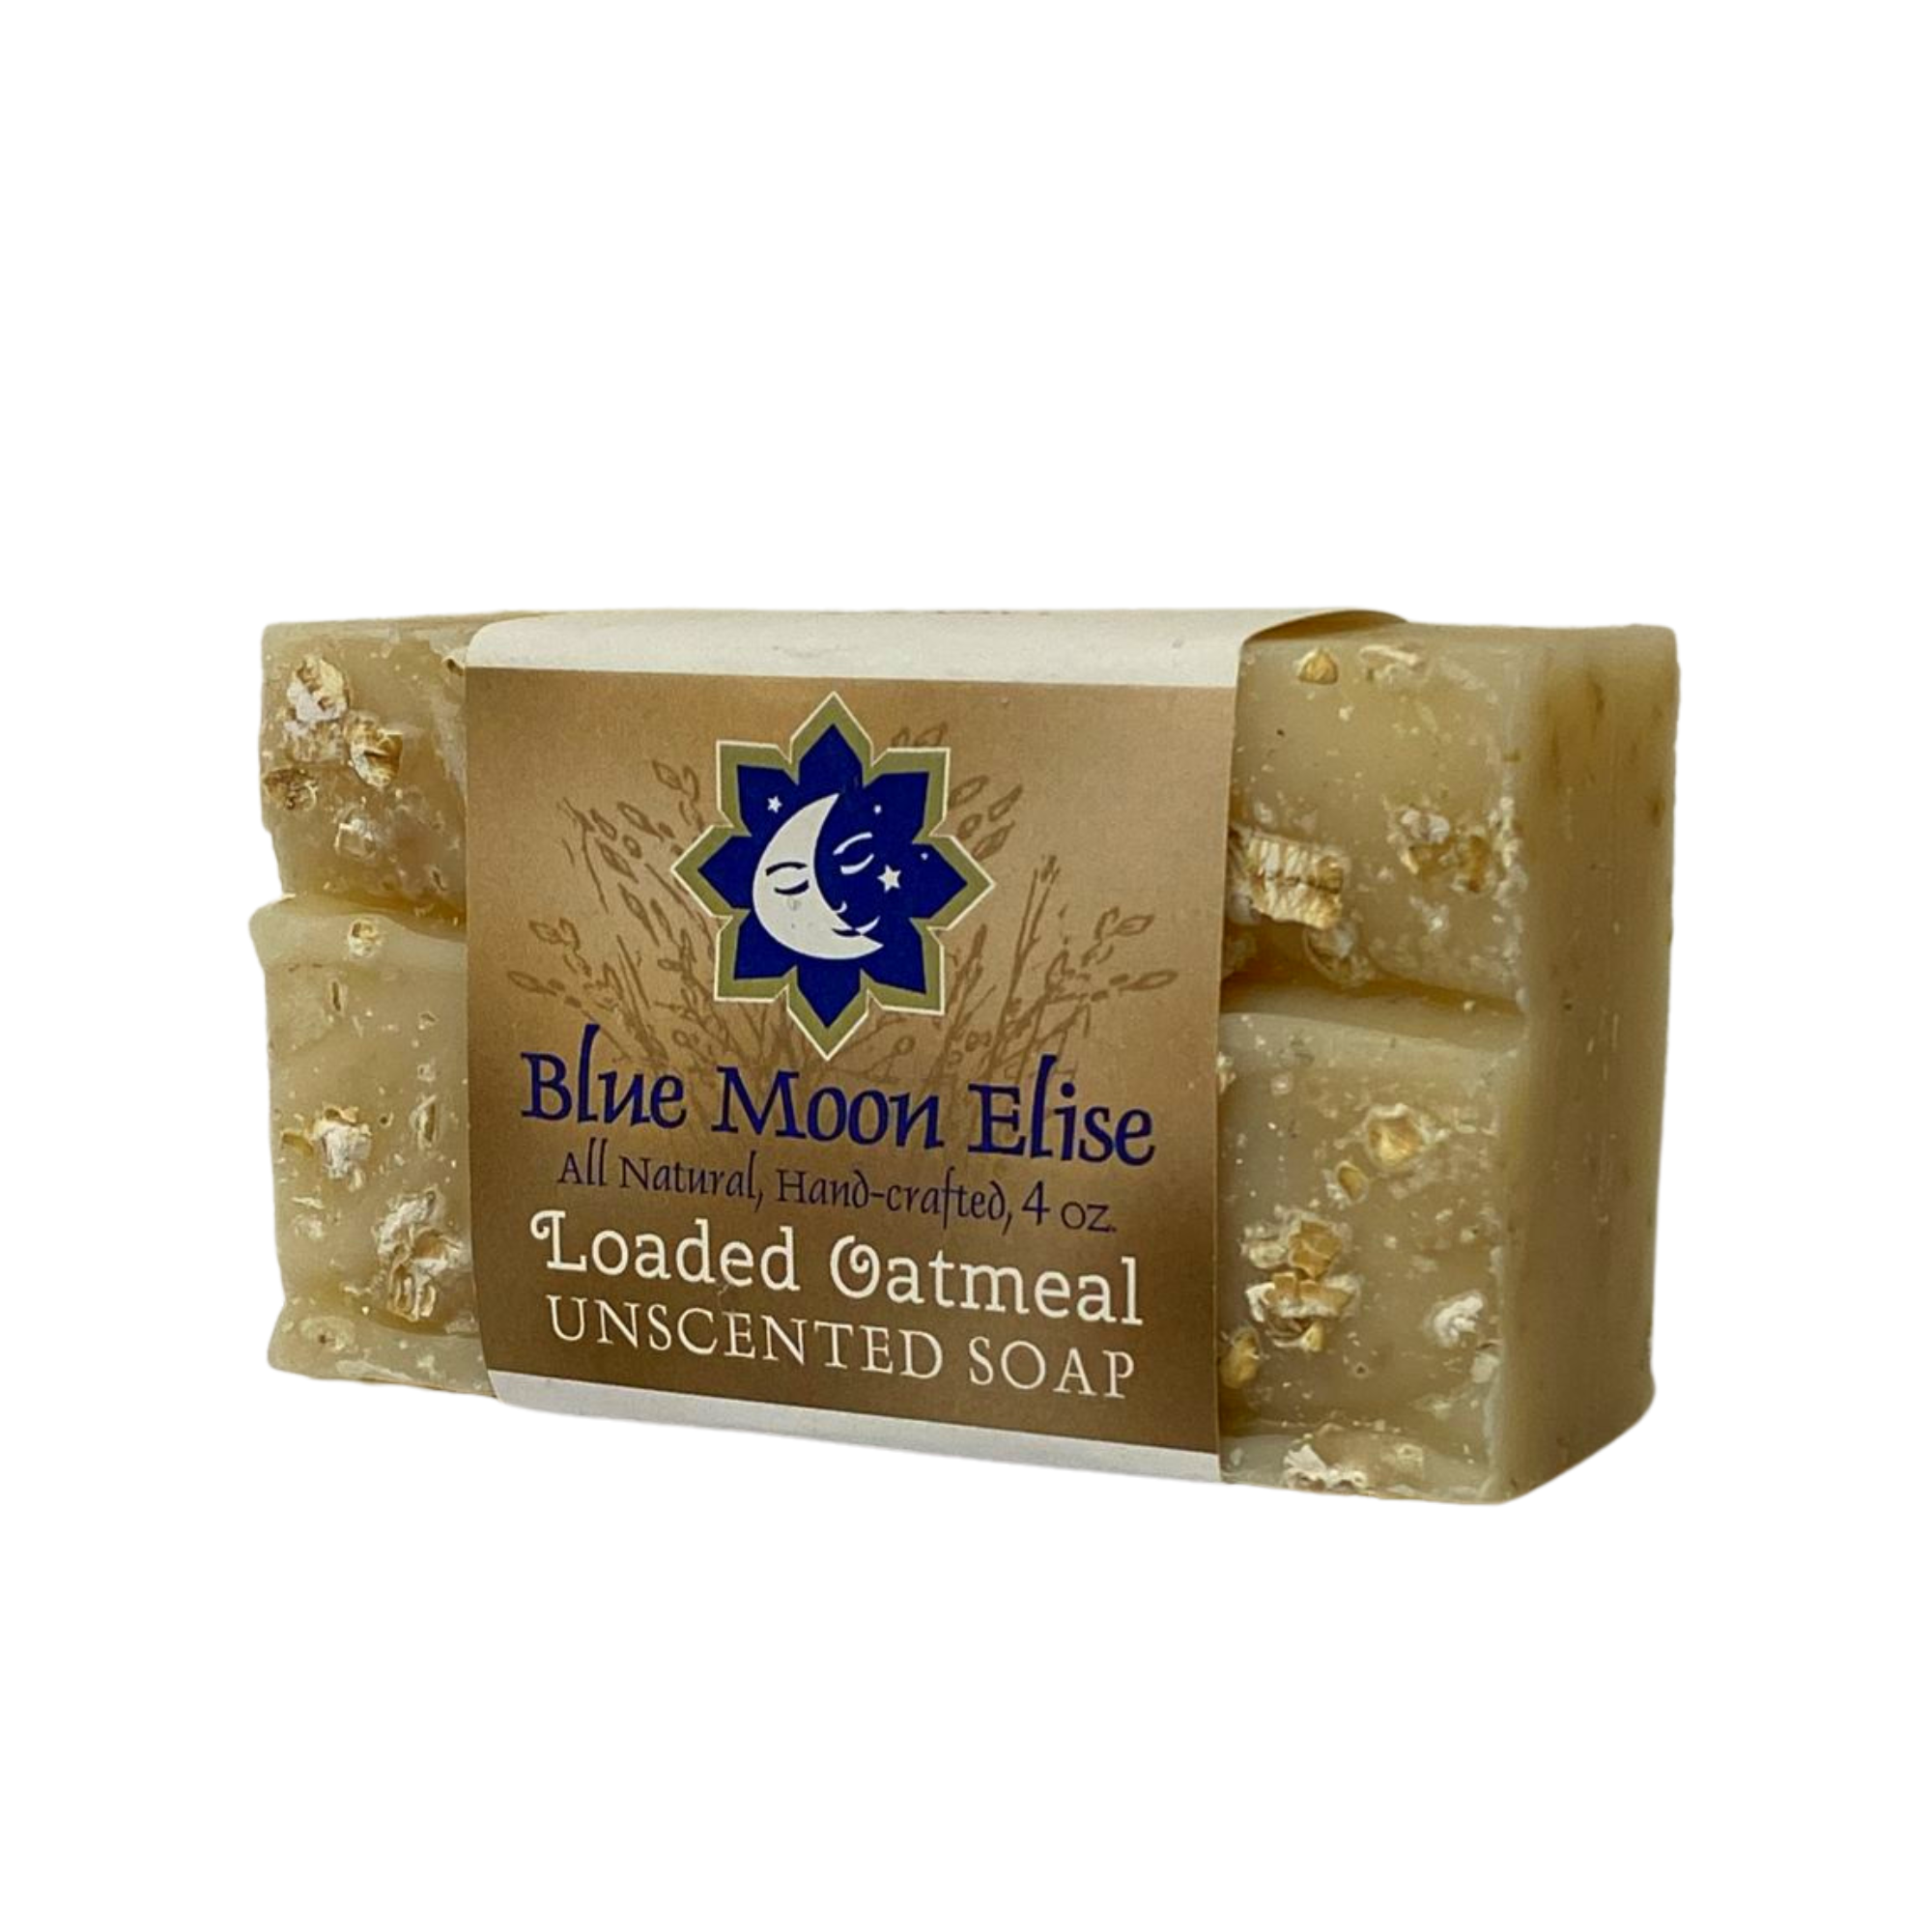 Loaded Oatmeal Unscented Soap